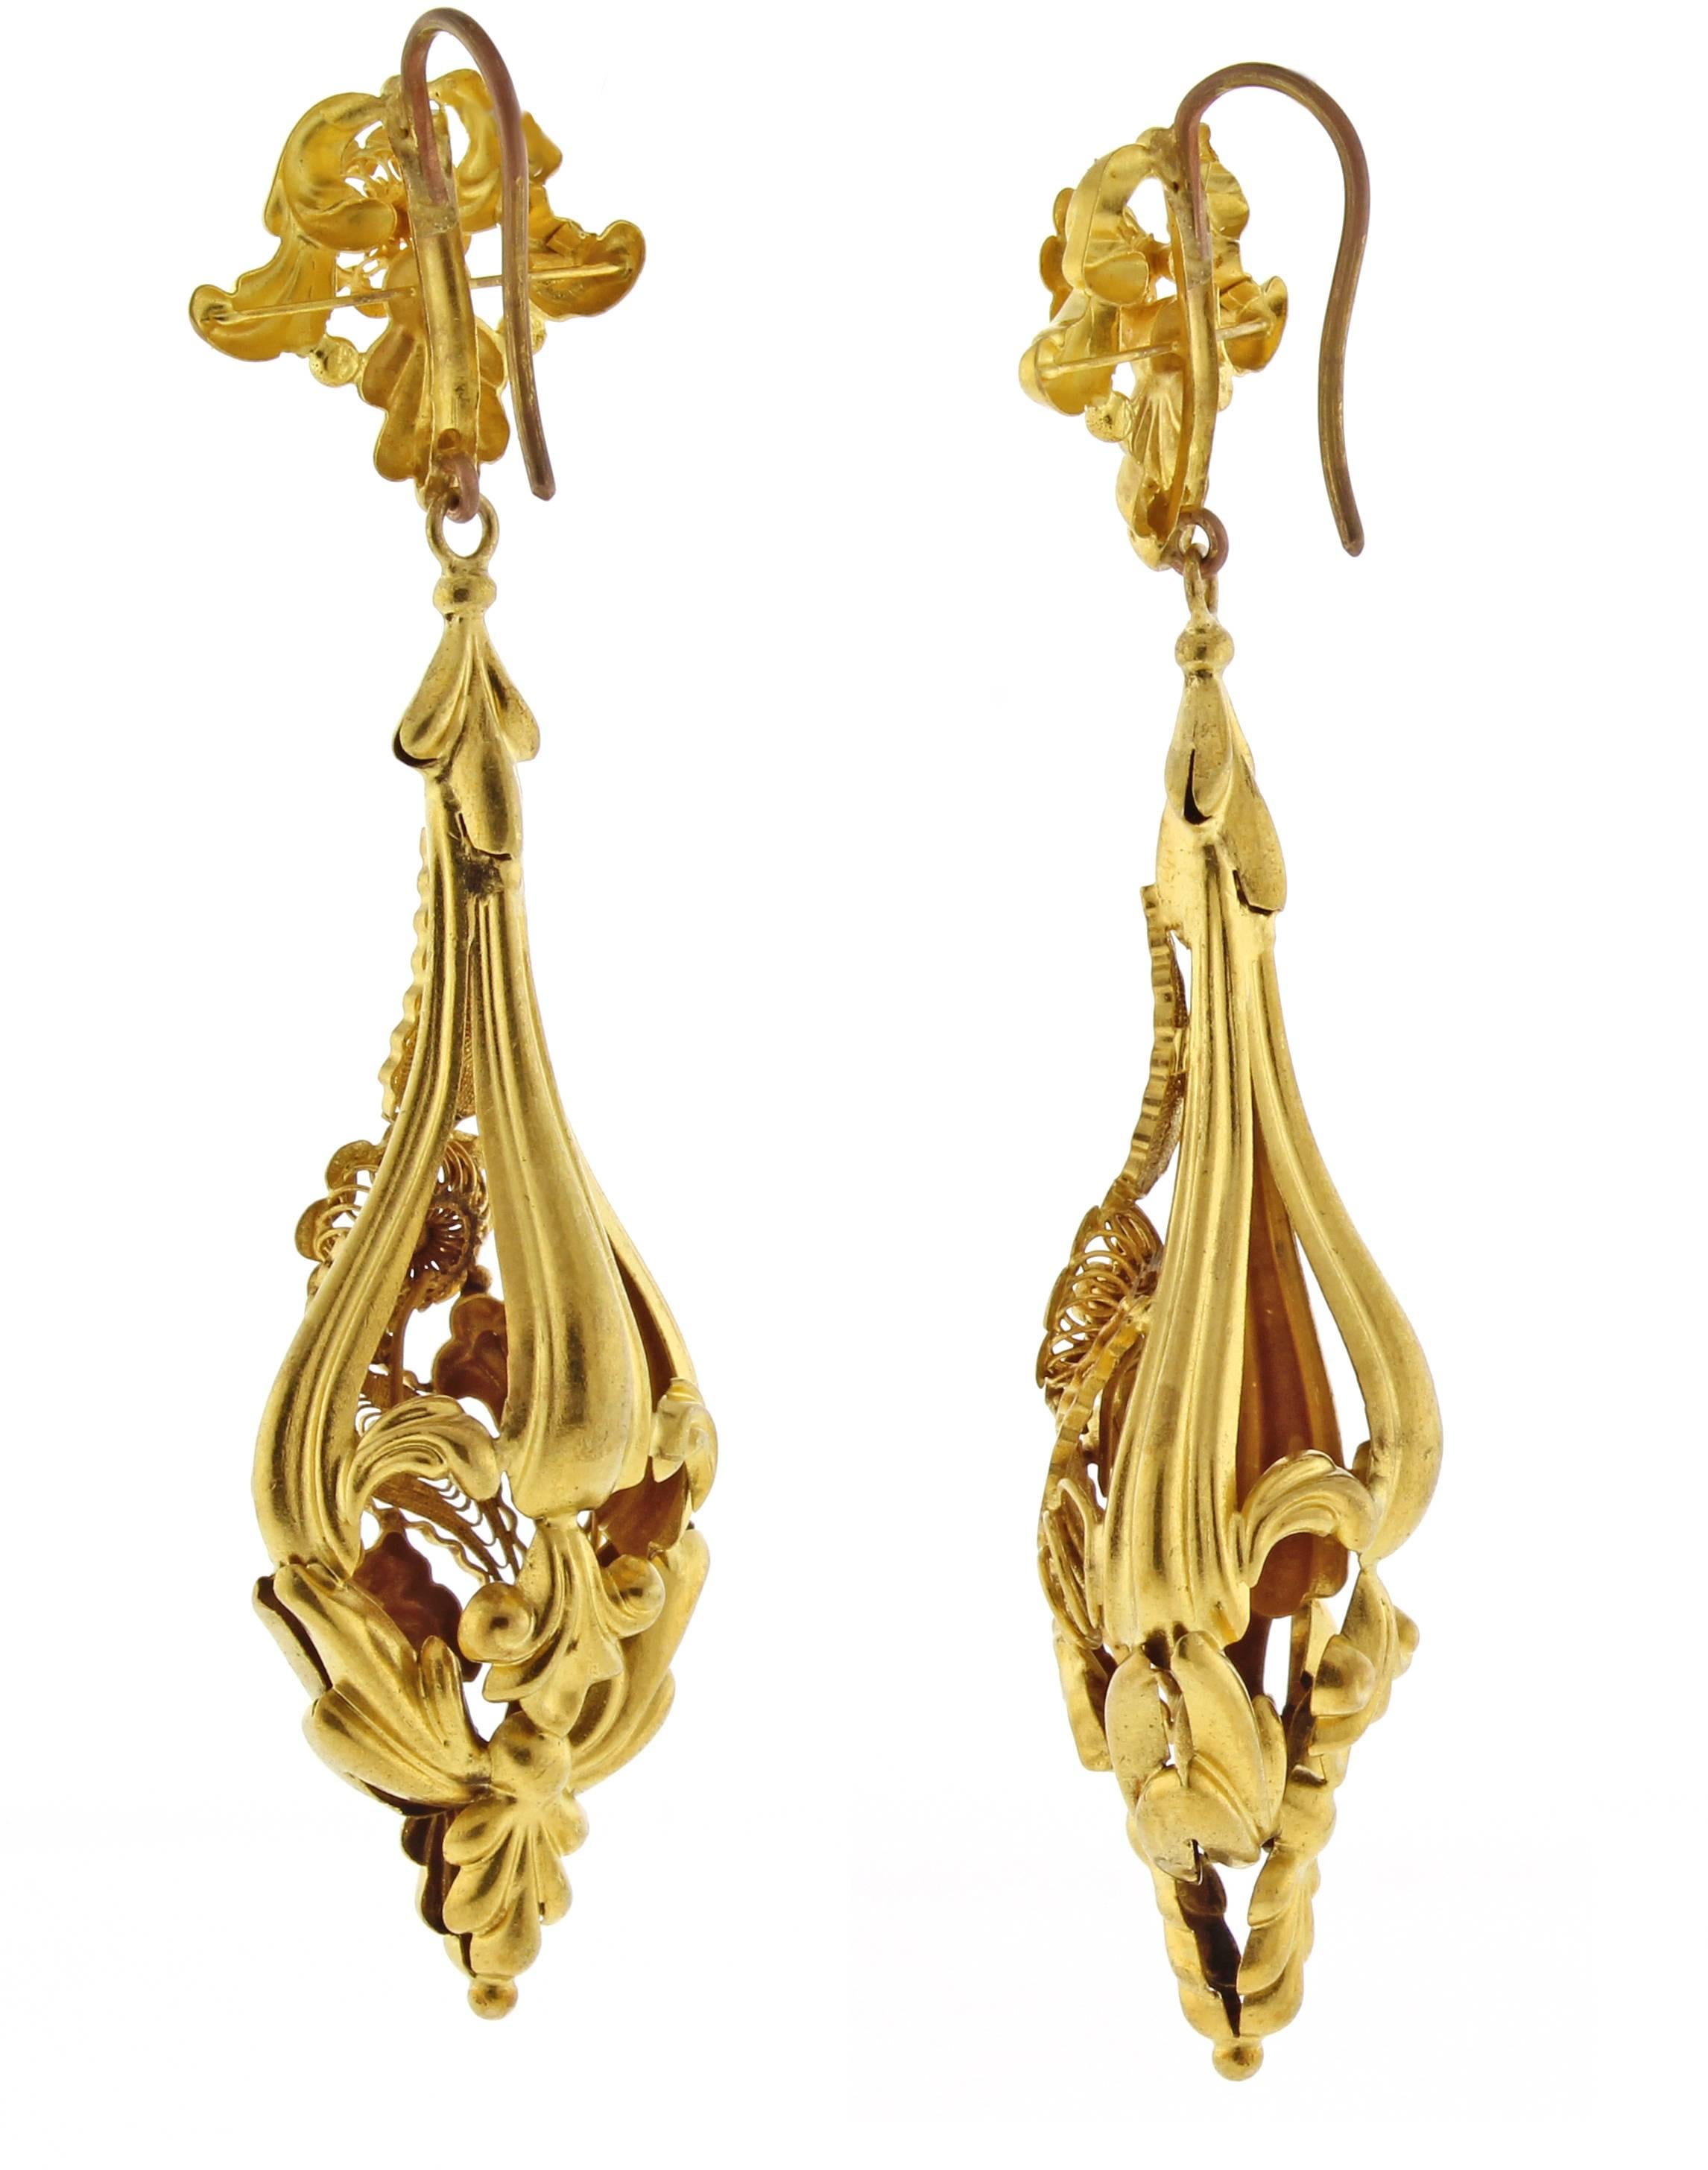 These fabulous 14 karat gold earring feature marvelous craftsmanship and stunning design.  Circa late 19th century. 2.5 inch long  